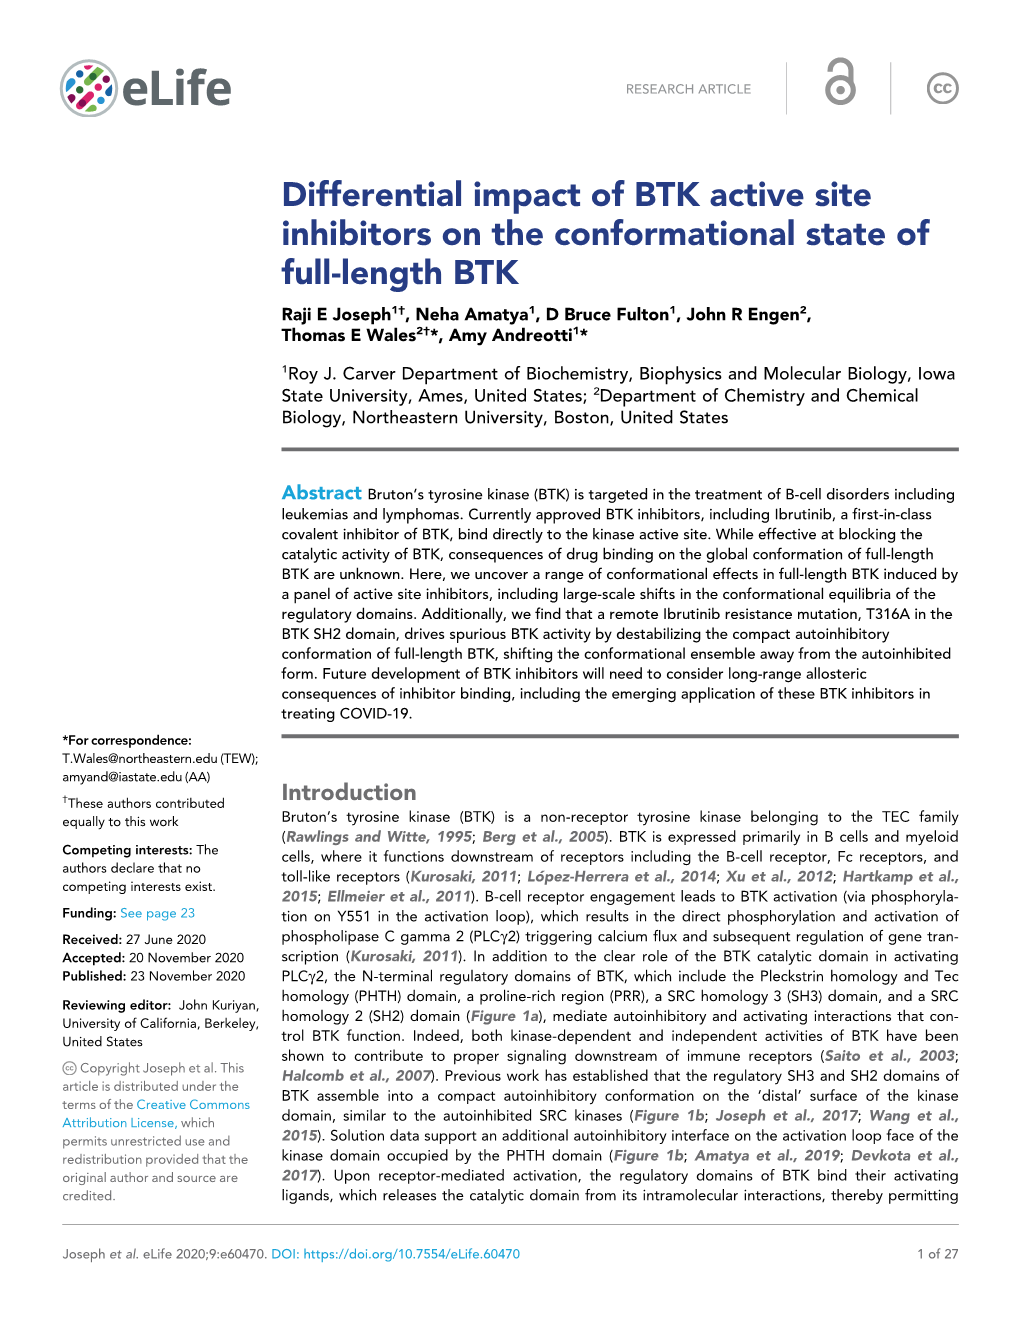 Differential Impact of BTK Active Site Inhibitors on the Conformational